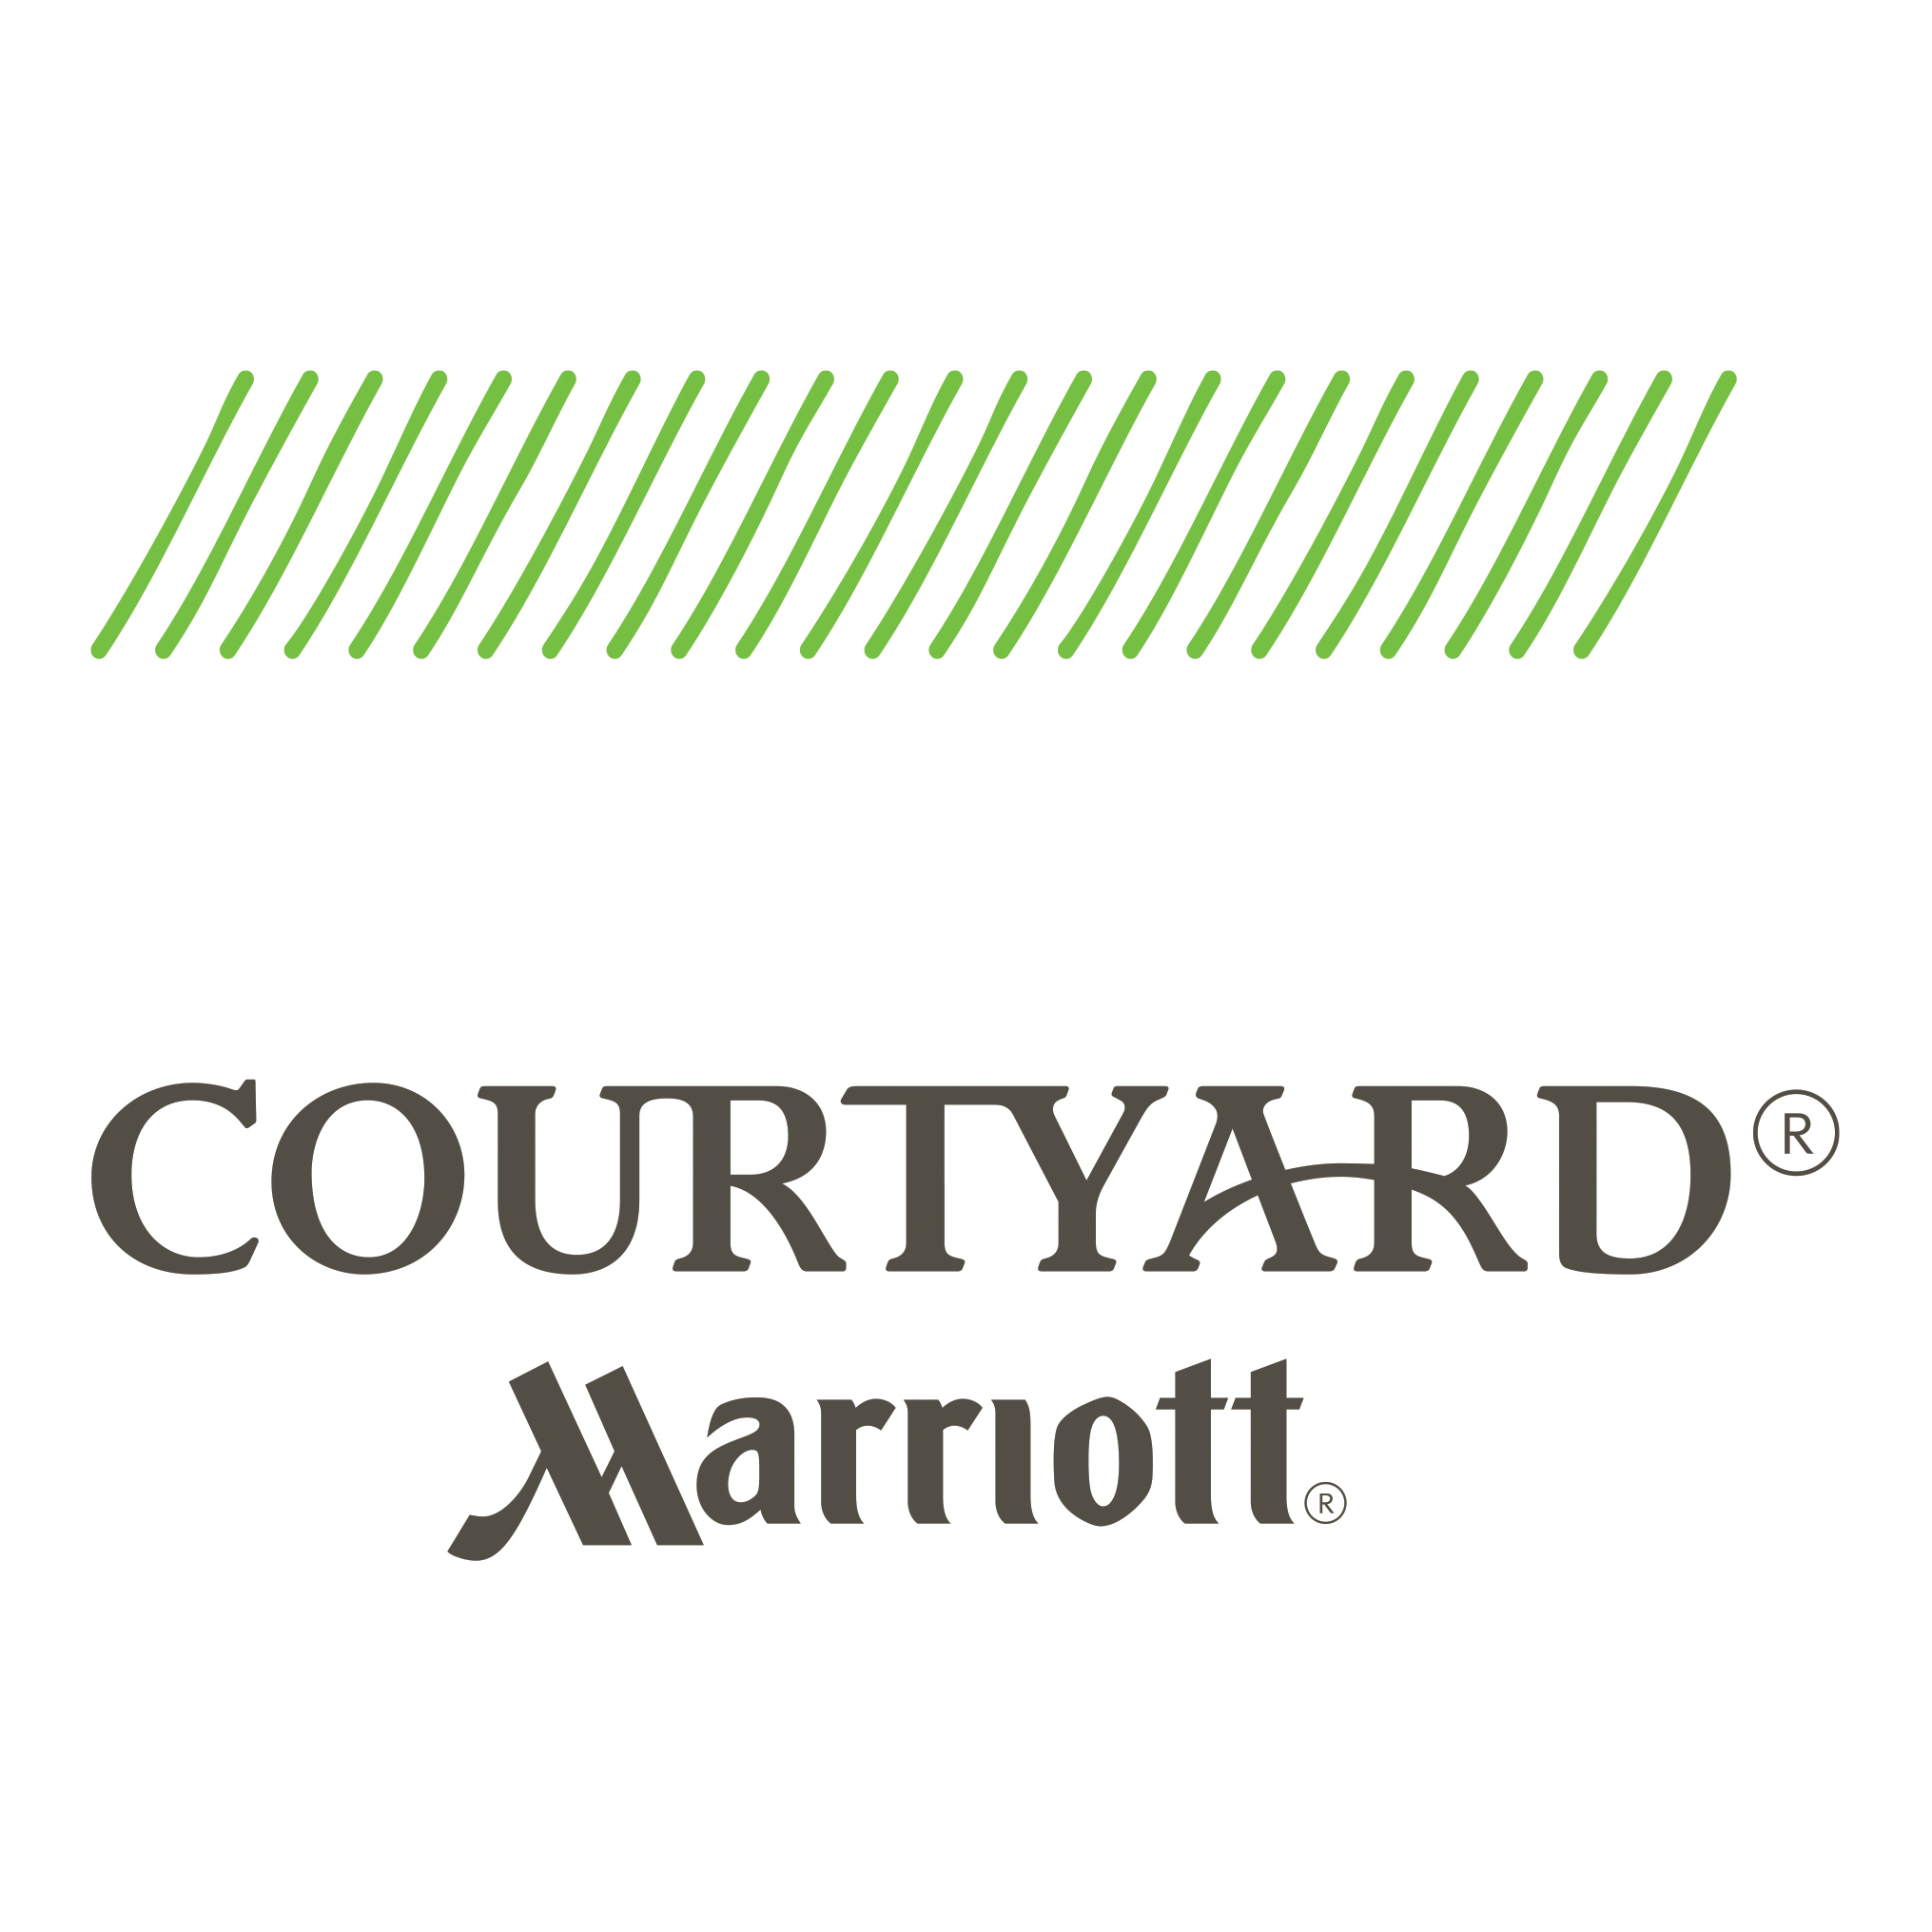 Courtyard by Marriott Jacksonville Mayo Clinic Campus/Beaches Logo